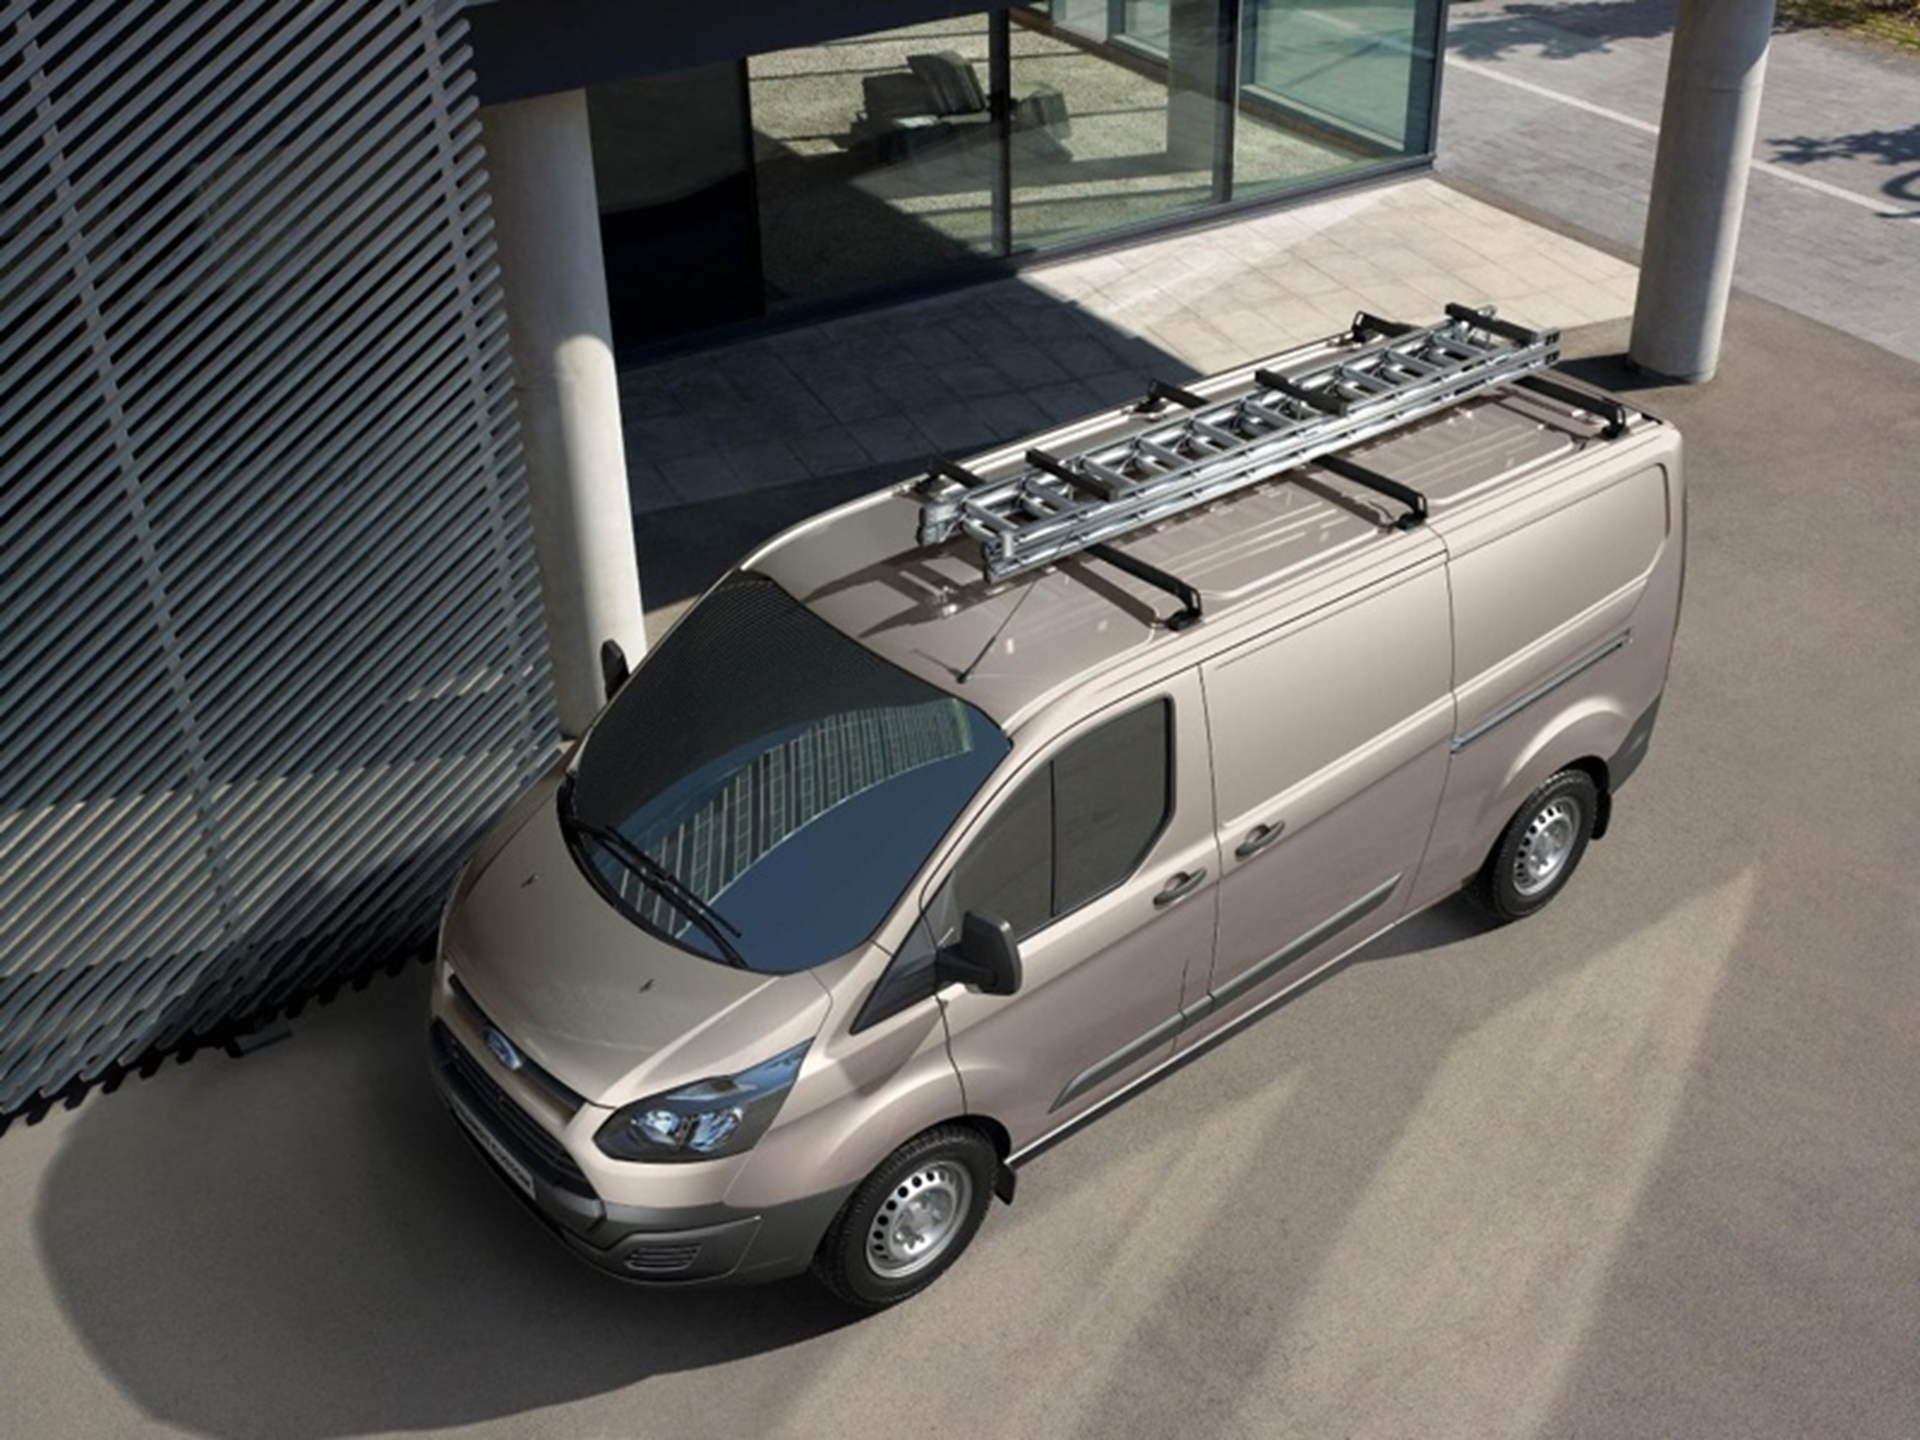 DYNAMIC NEW FORD TRANSIT CUSTOM BRINGS NEW LEVELS OF STYLE AND FUNCTIONALITY TO THE ONE-TONNE VAN MARKET